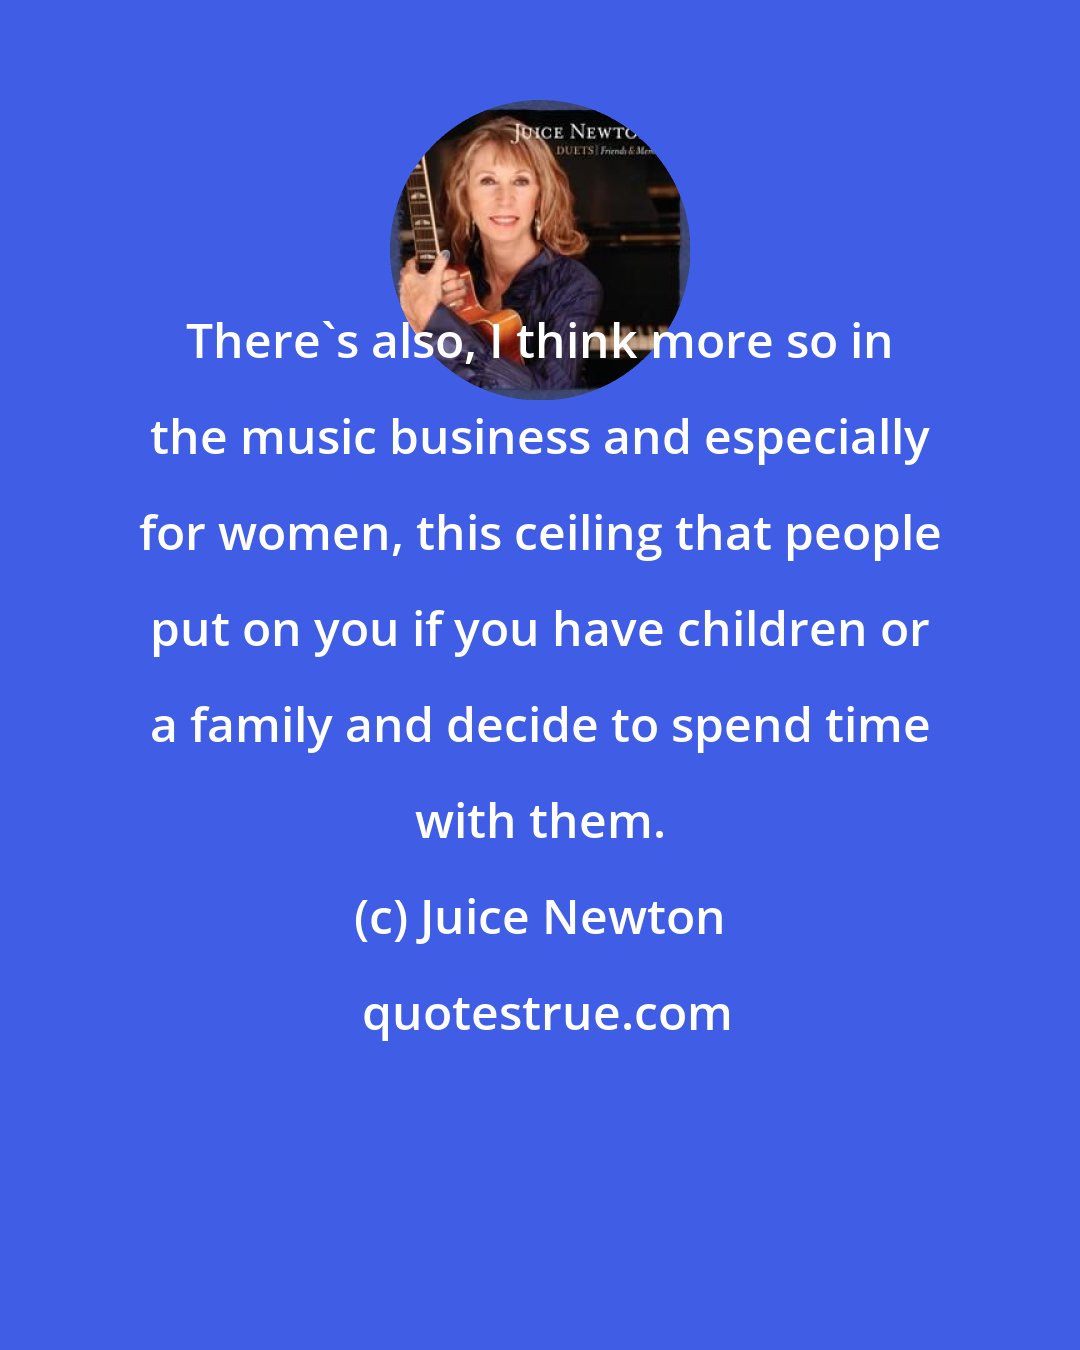 Juice Newton: There's also, I think more so in the music business and especially for women, this ceiling that people put on you if you have children or a family and decide to spend time with them.